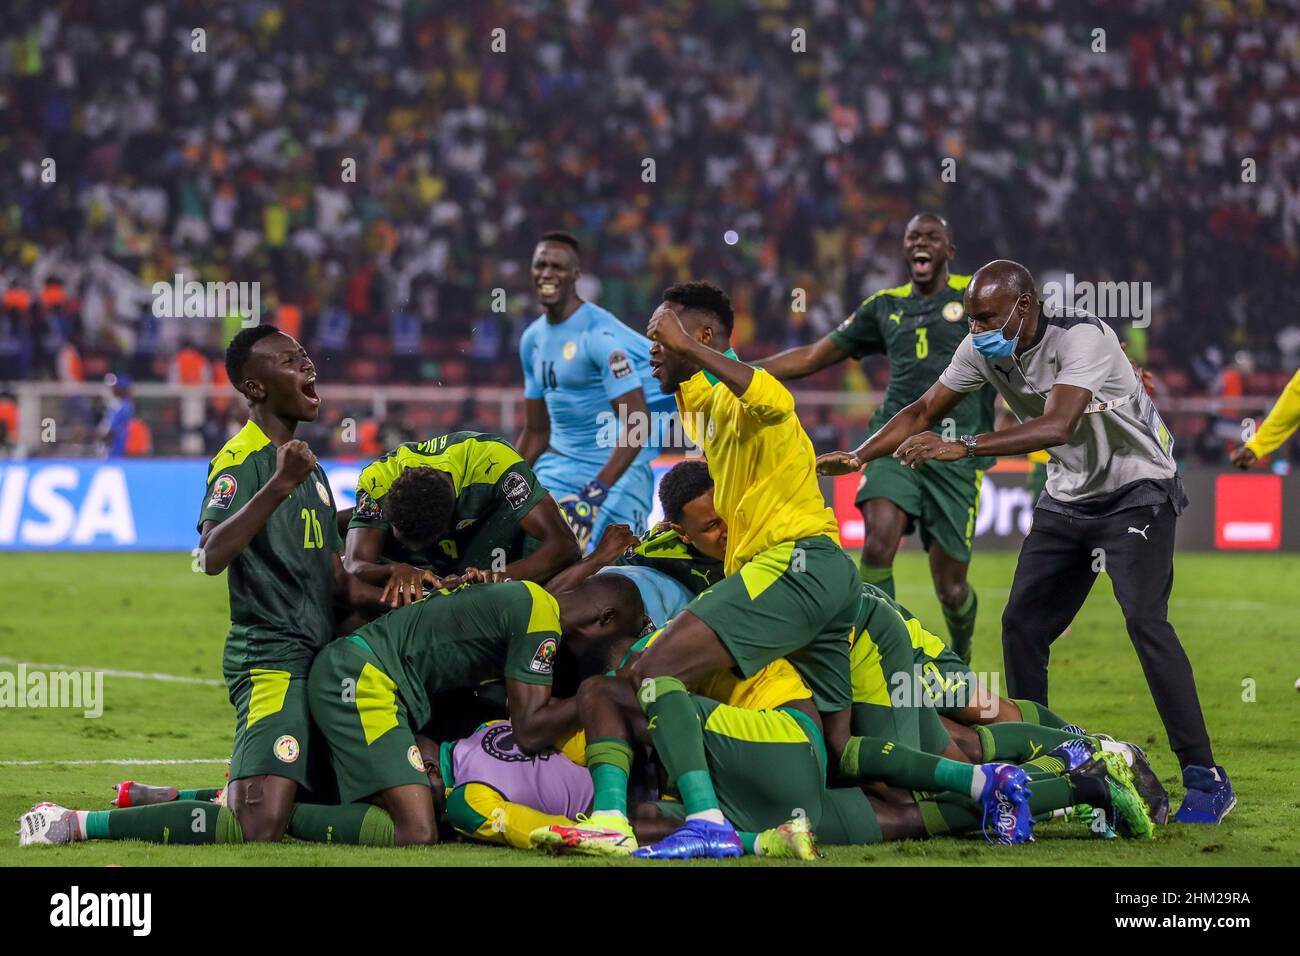 CAMEROON, Yaounde, February 06 2022 - Abdou Diallo and Pape Gueye and Senegal teammates celebrates during the Africa Cup of Nations Final between Senegal and Egypt at Stade d'Olembe, Yaounde, CMR 06/02/2022 Photo SFSI Credit: Sebo47/Alamy Live News Stock Photo